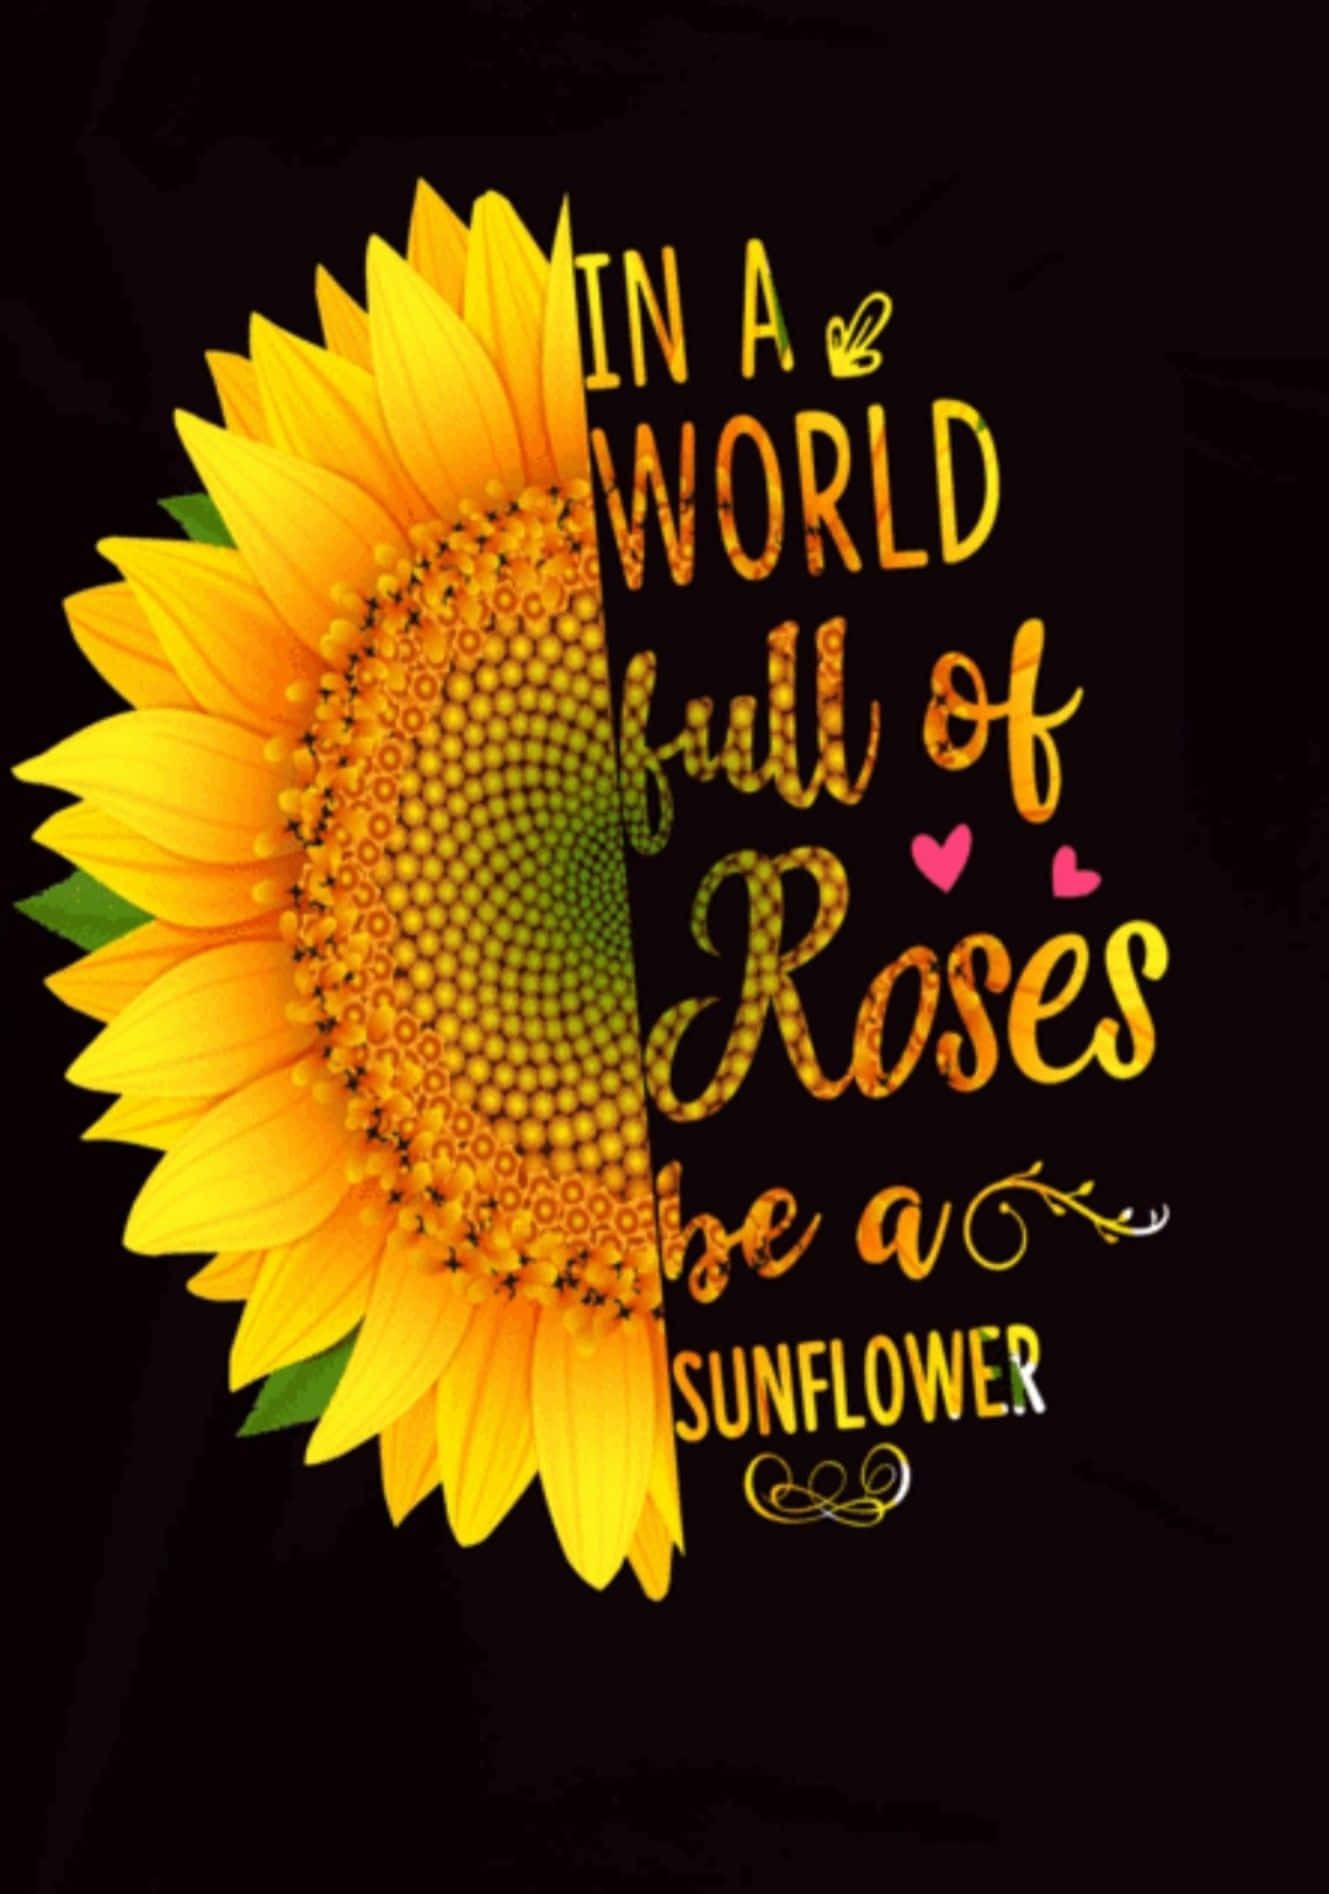 "A sunflower to brighten your day" Wallpaper